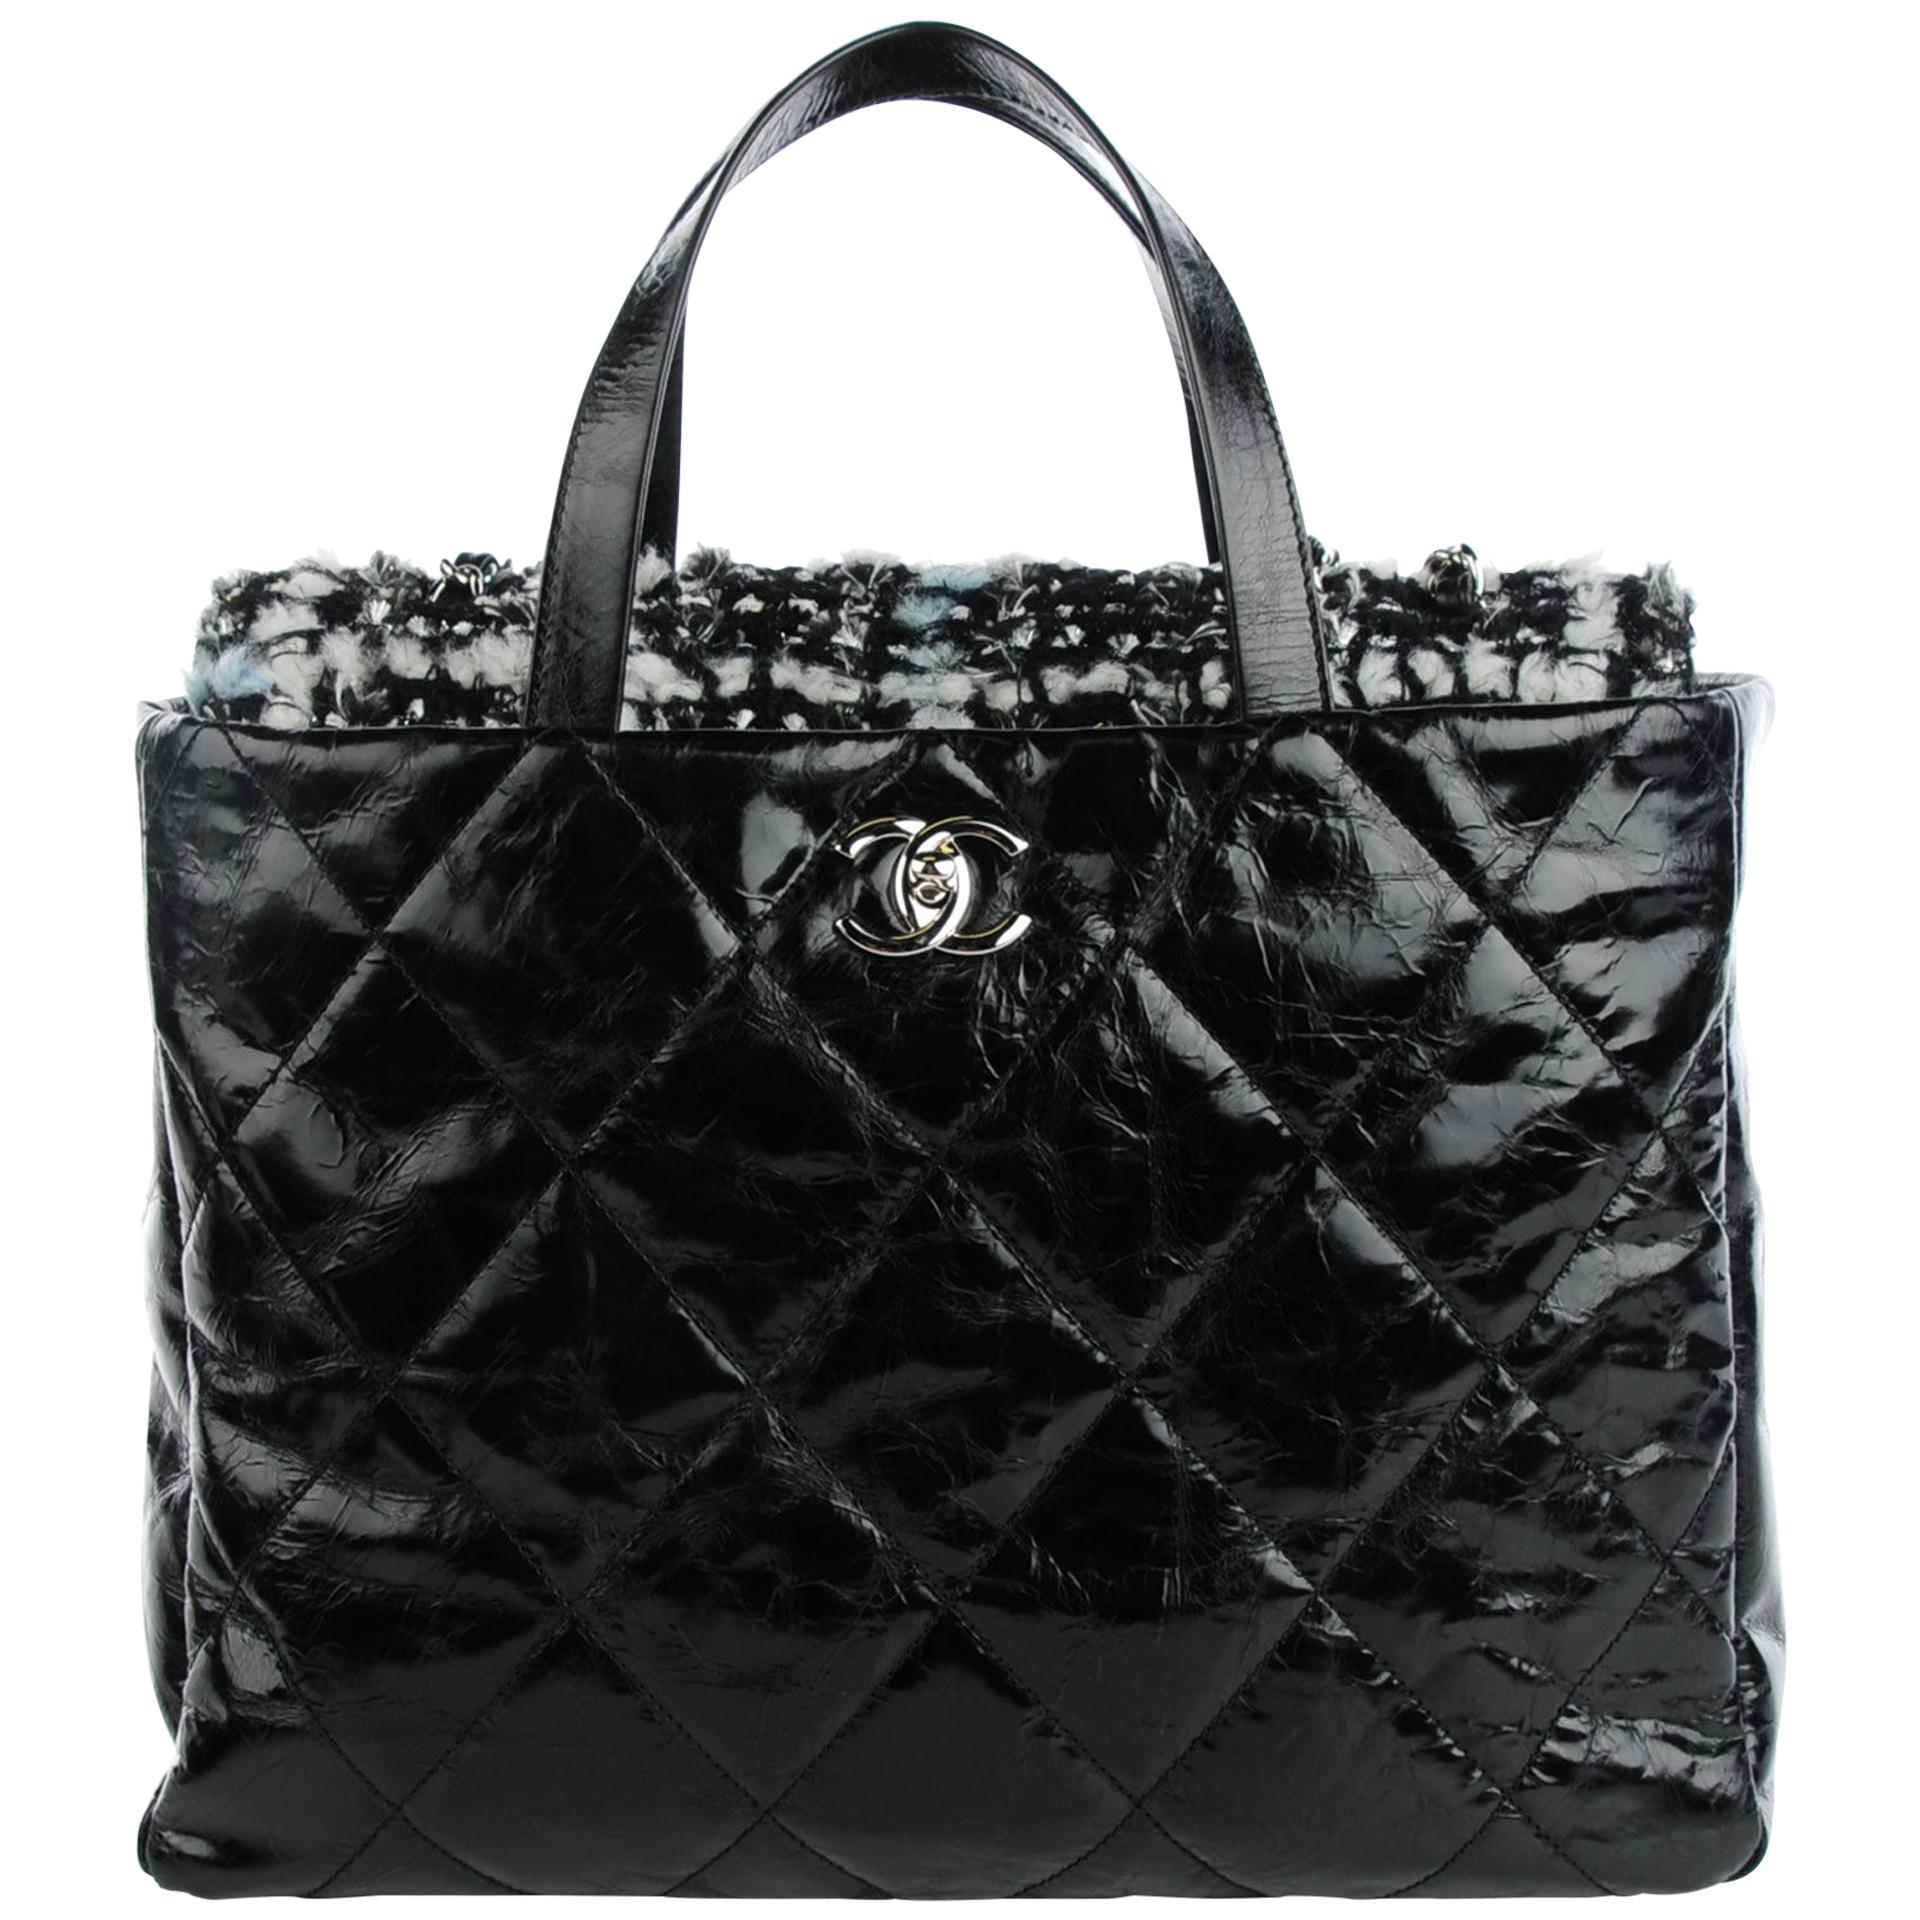 Chanel Limited Edition Soho Glazed Calfskin Quilted Tweed Flight Travel Tote Bag